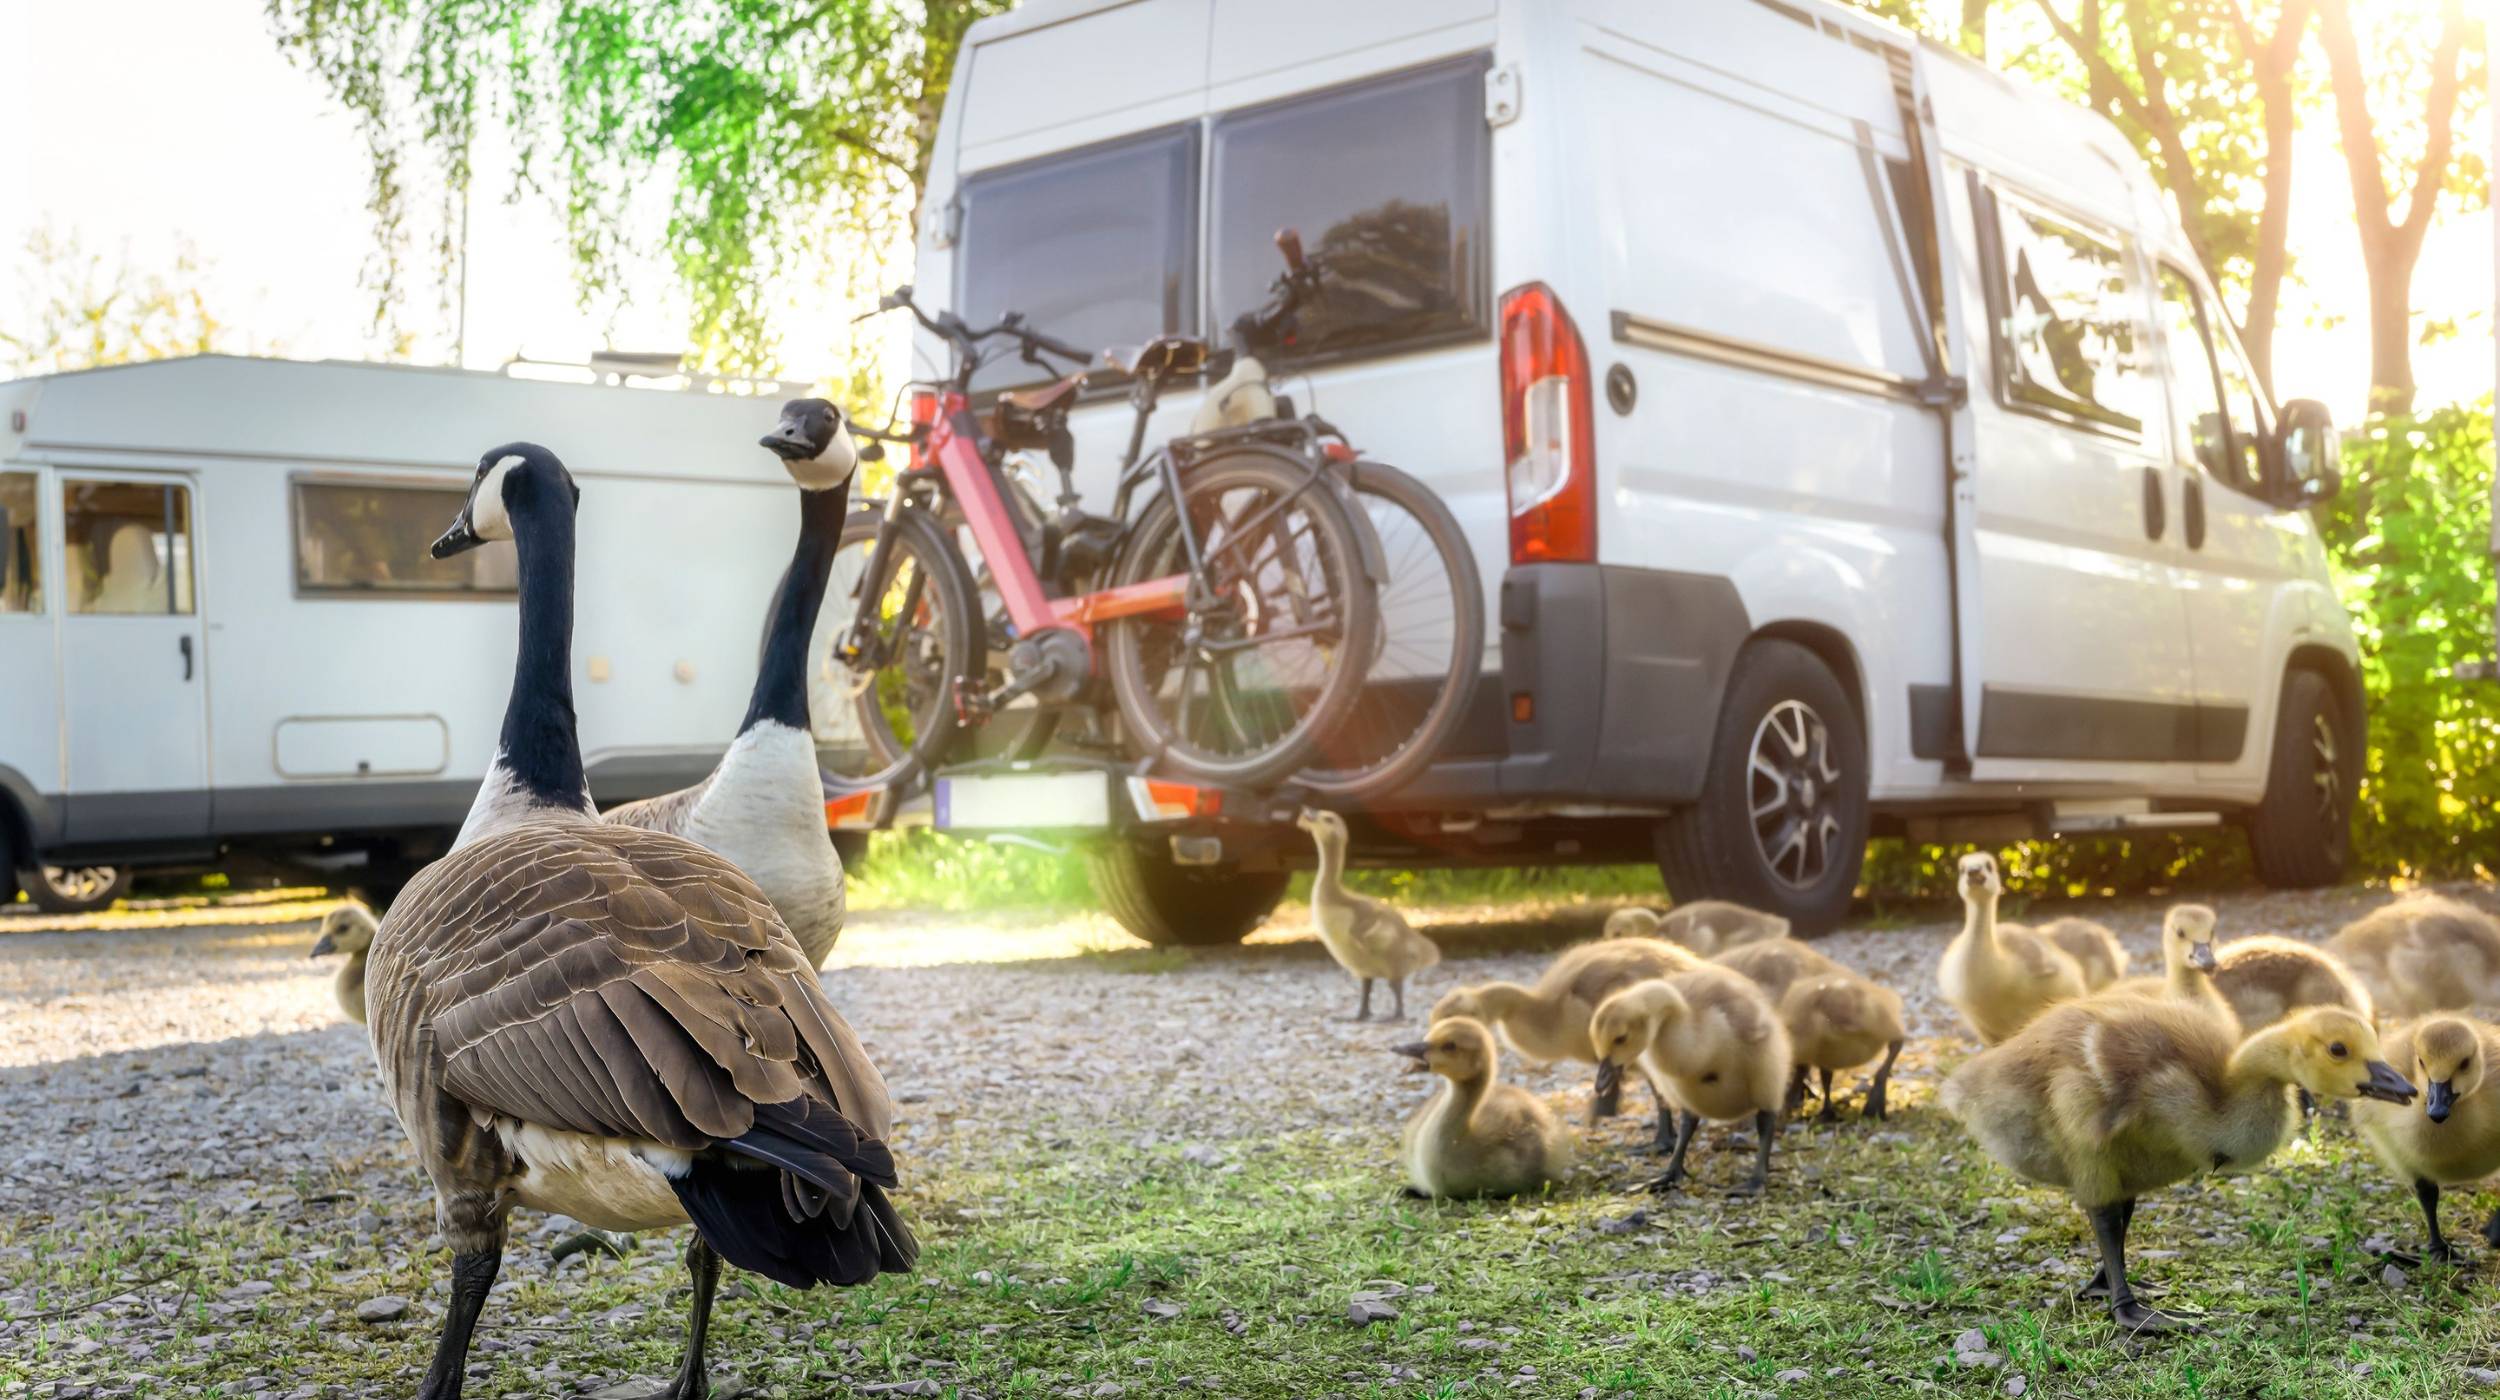 Find Your Perfect Replacement Caravan Mattress: Enjoy peaceful nights in your motorhome or campervan. Scenic view with Canadian geese and goslings.